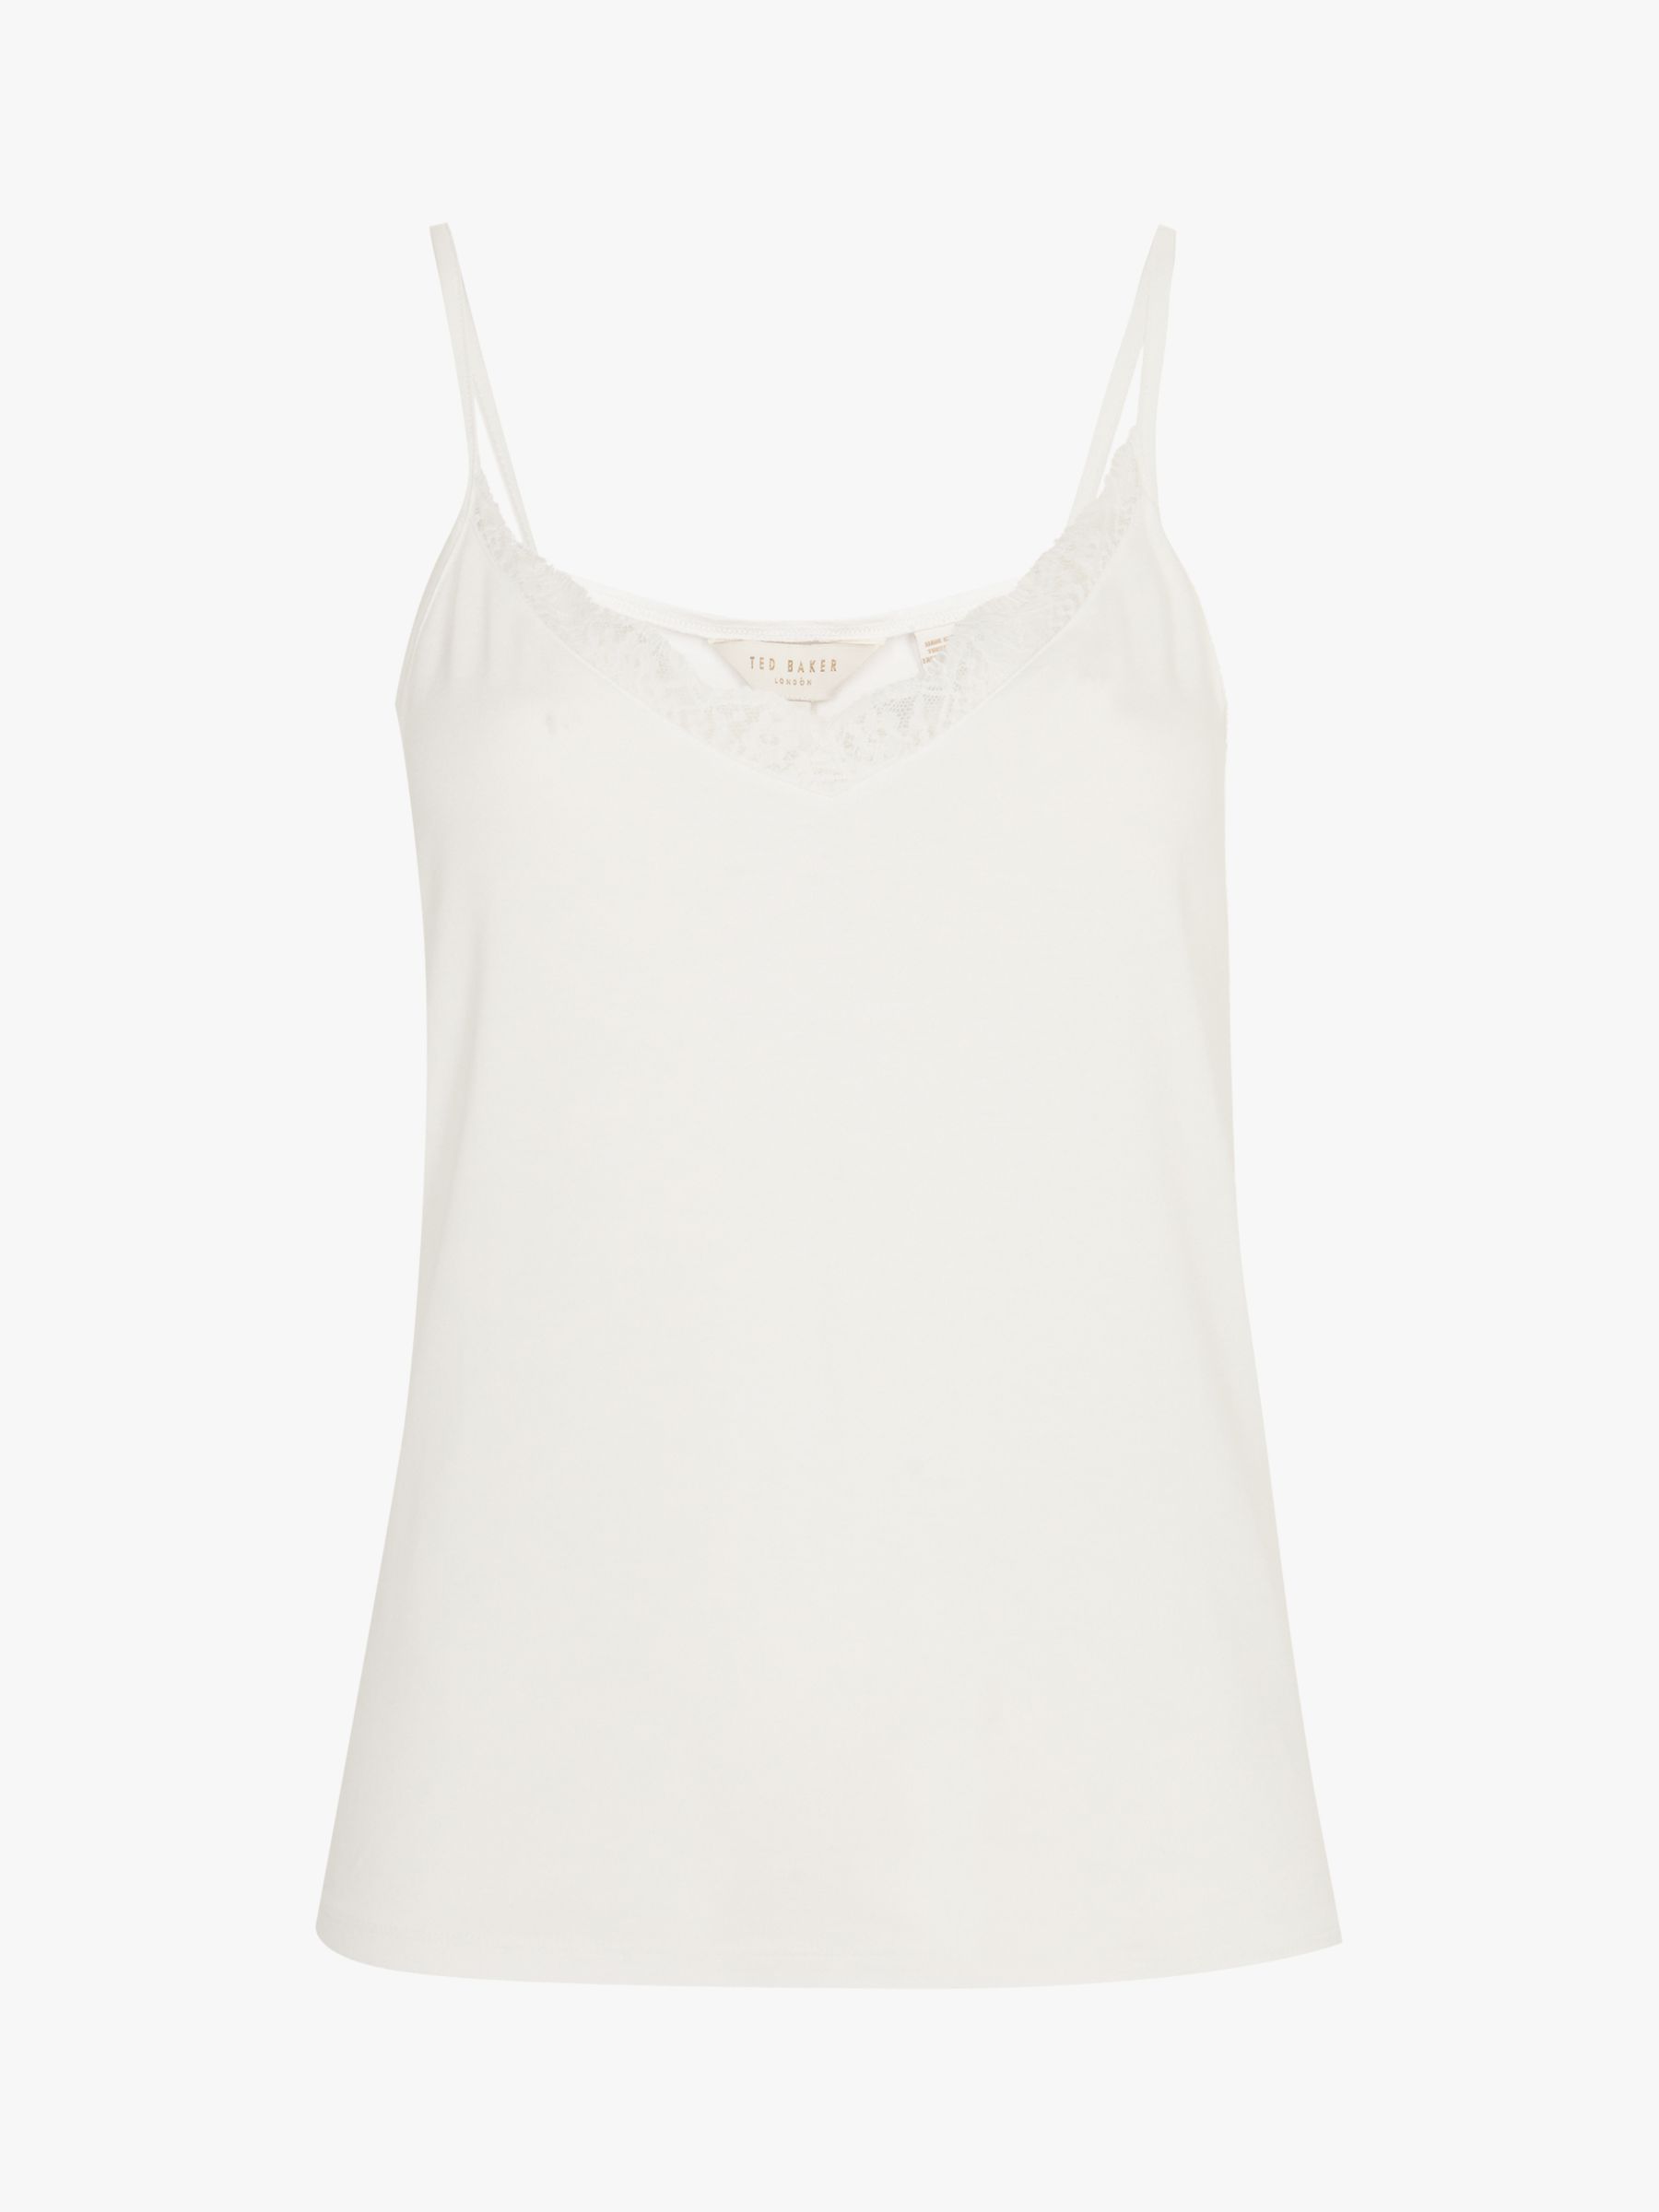 Ted Baker Paygee Lace Detail Cami, Ivory at John Lewis & Partners